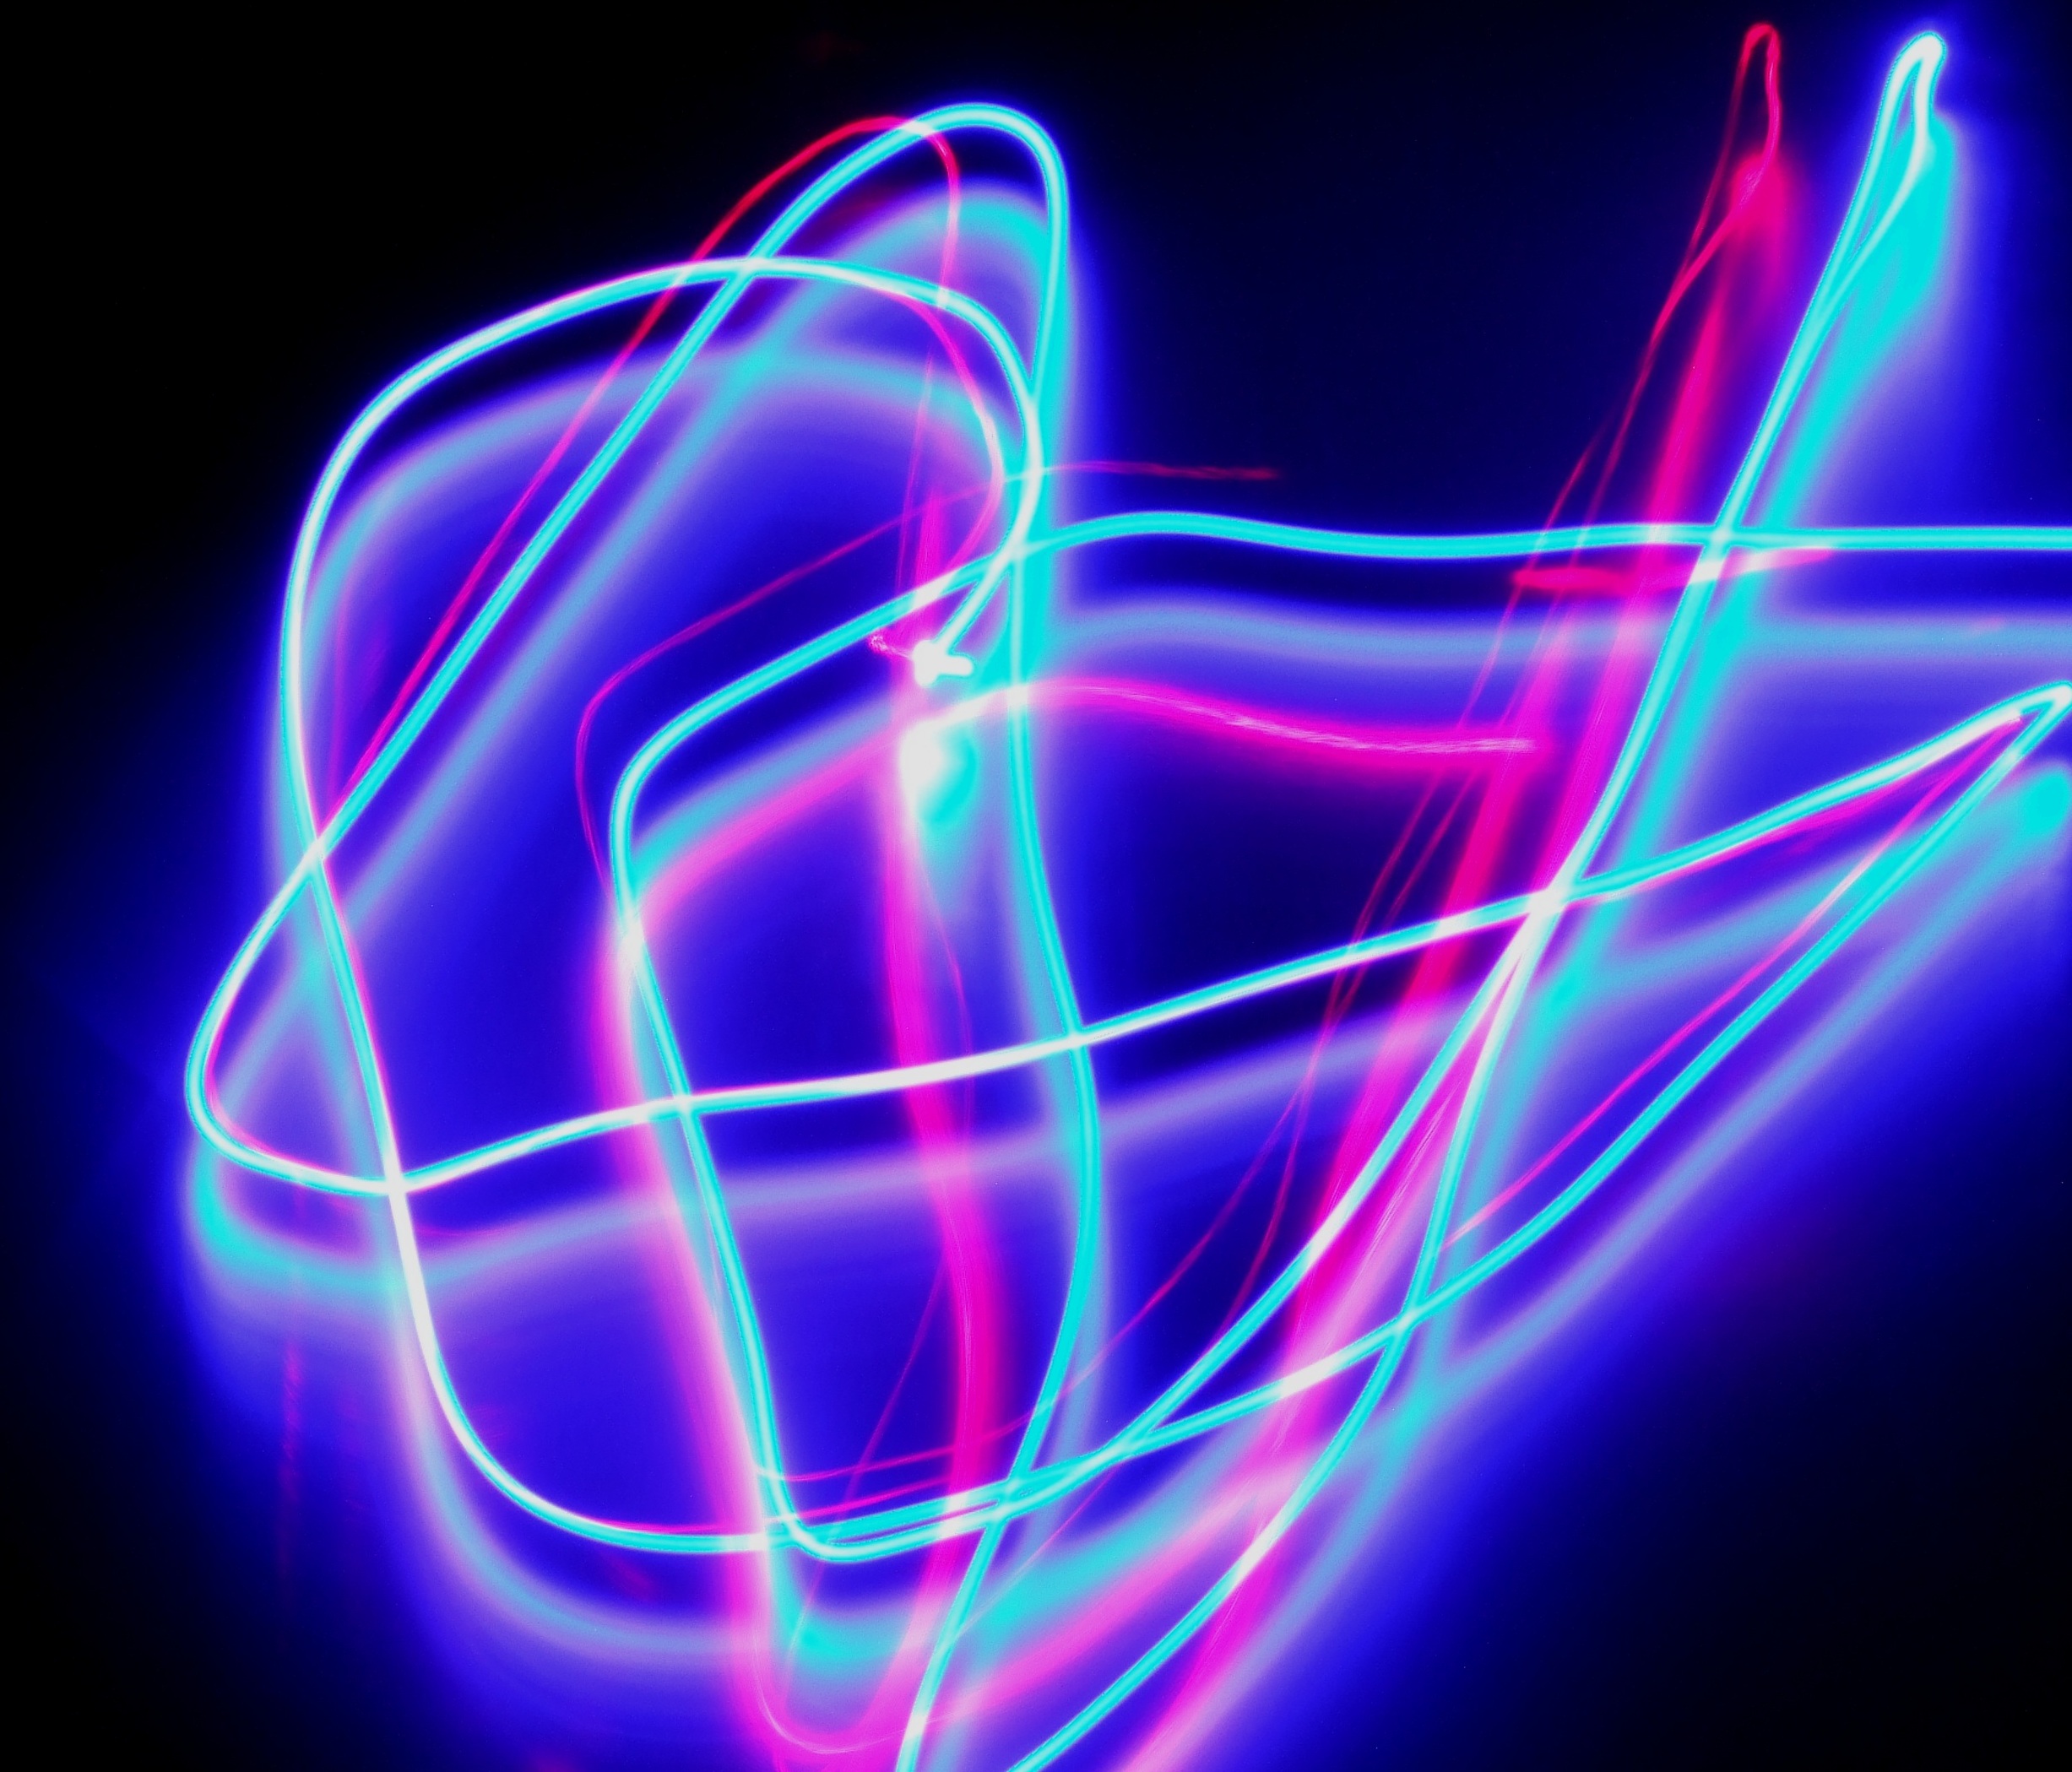 Drawing Light I have been fascinated for a long time with the concept of drawing with light. I stumbled across an article once several years ago, written by an artist and ...